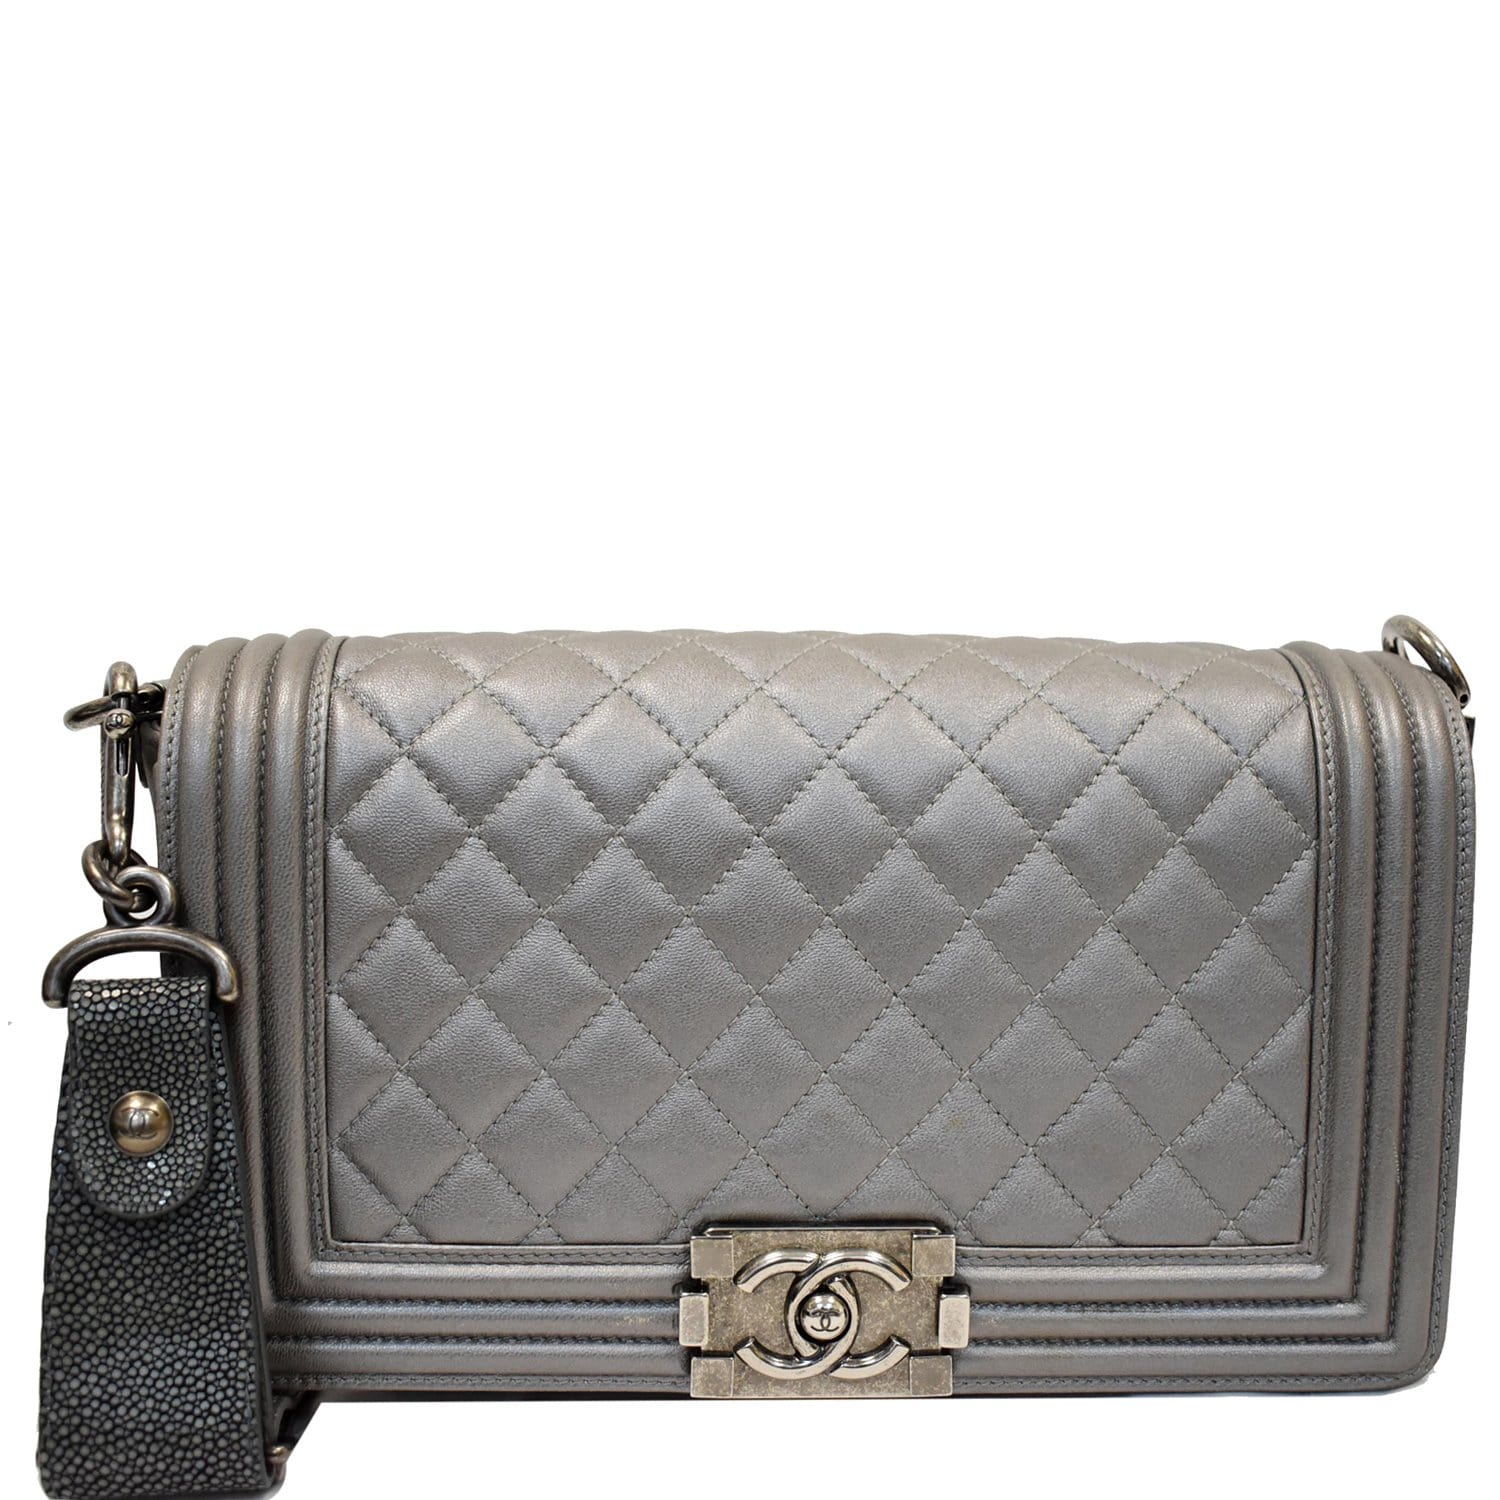 CHANEL Boy Flap with Stingray Lambskin Leather Shoulder Bag Silver - 1